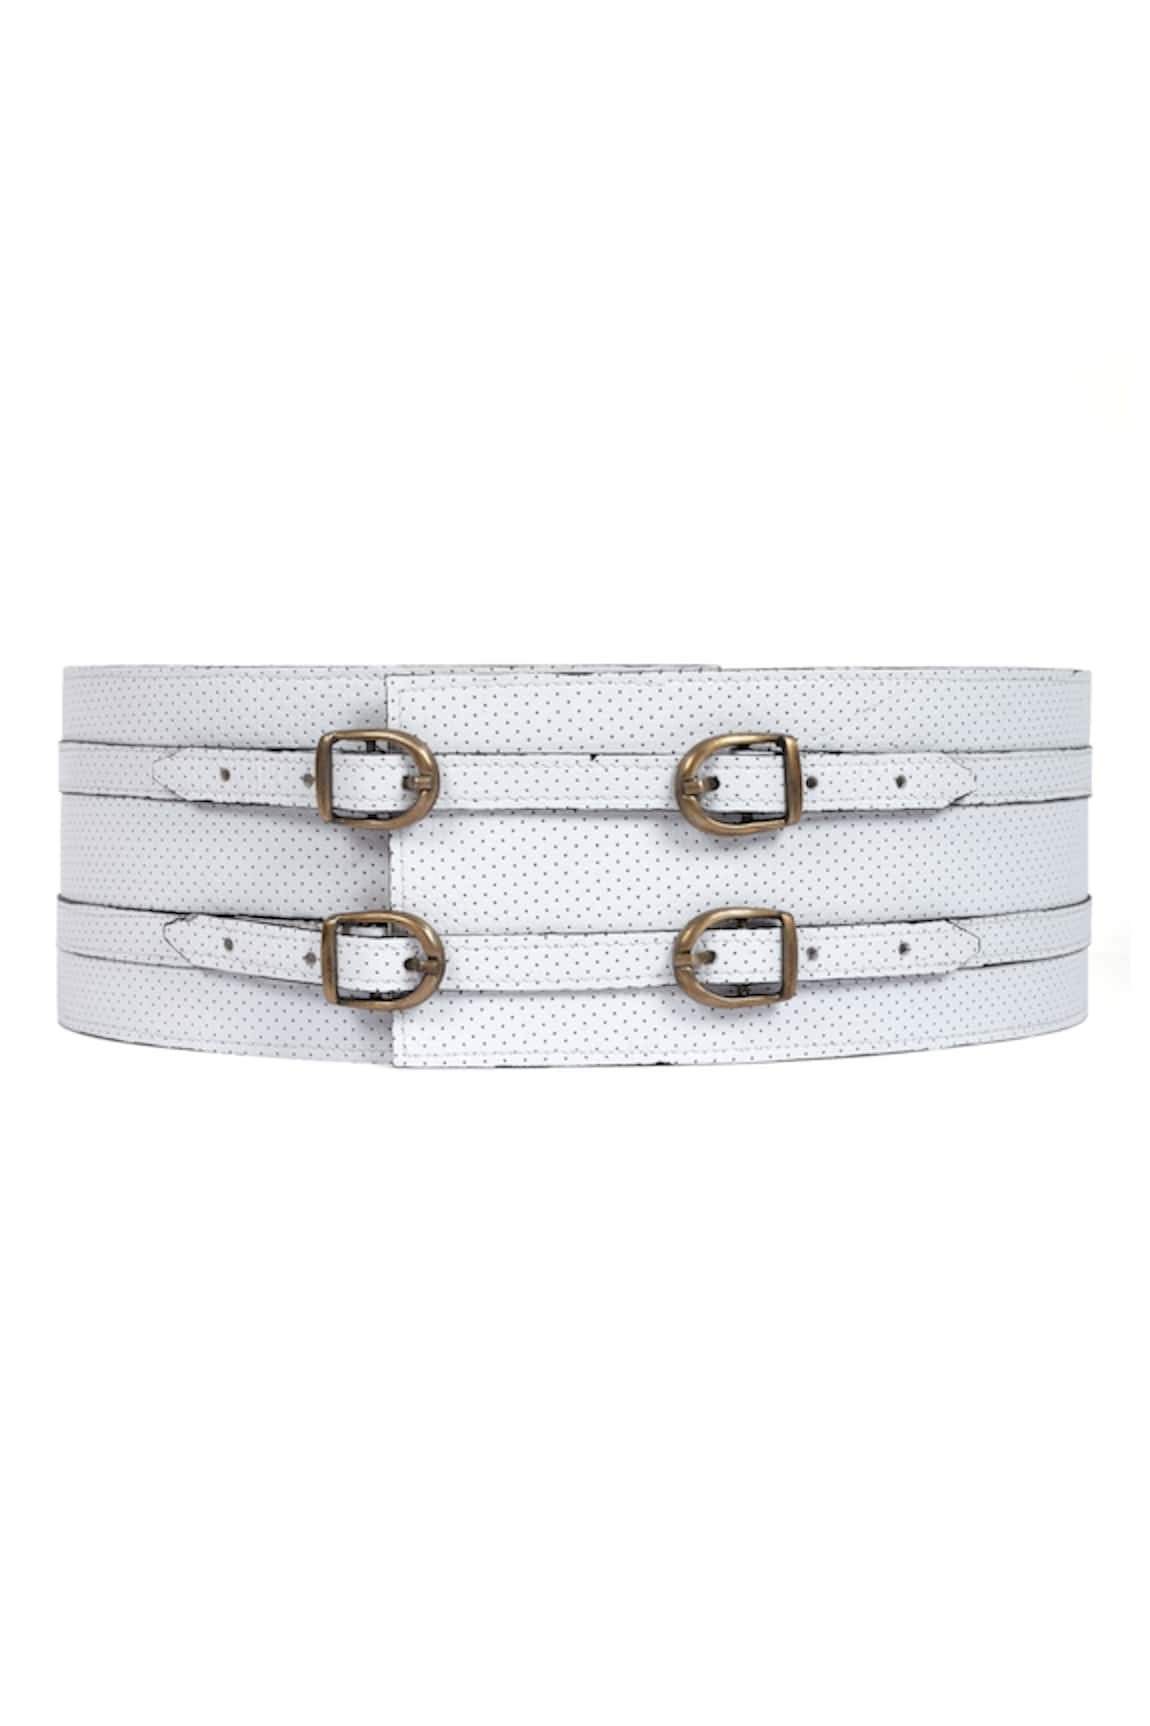 TROV Penny Crafted Leather Buckle Belt